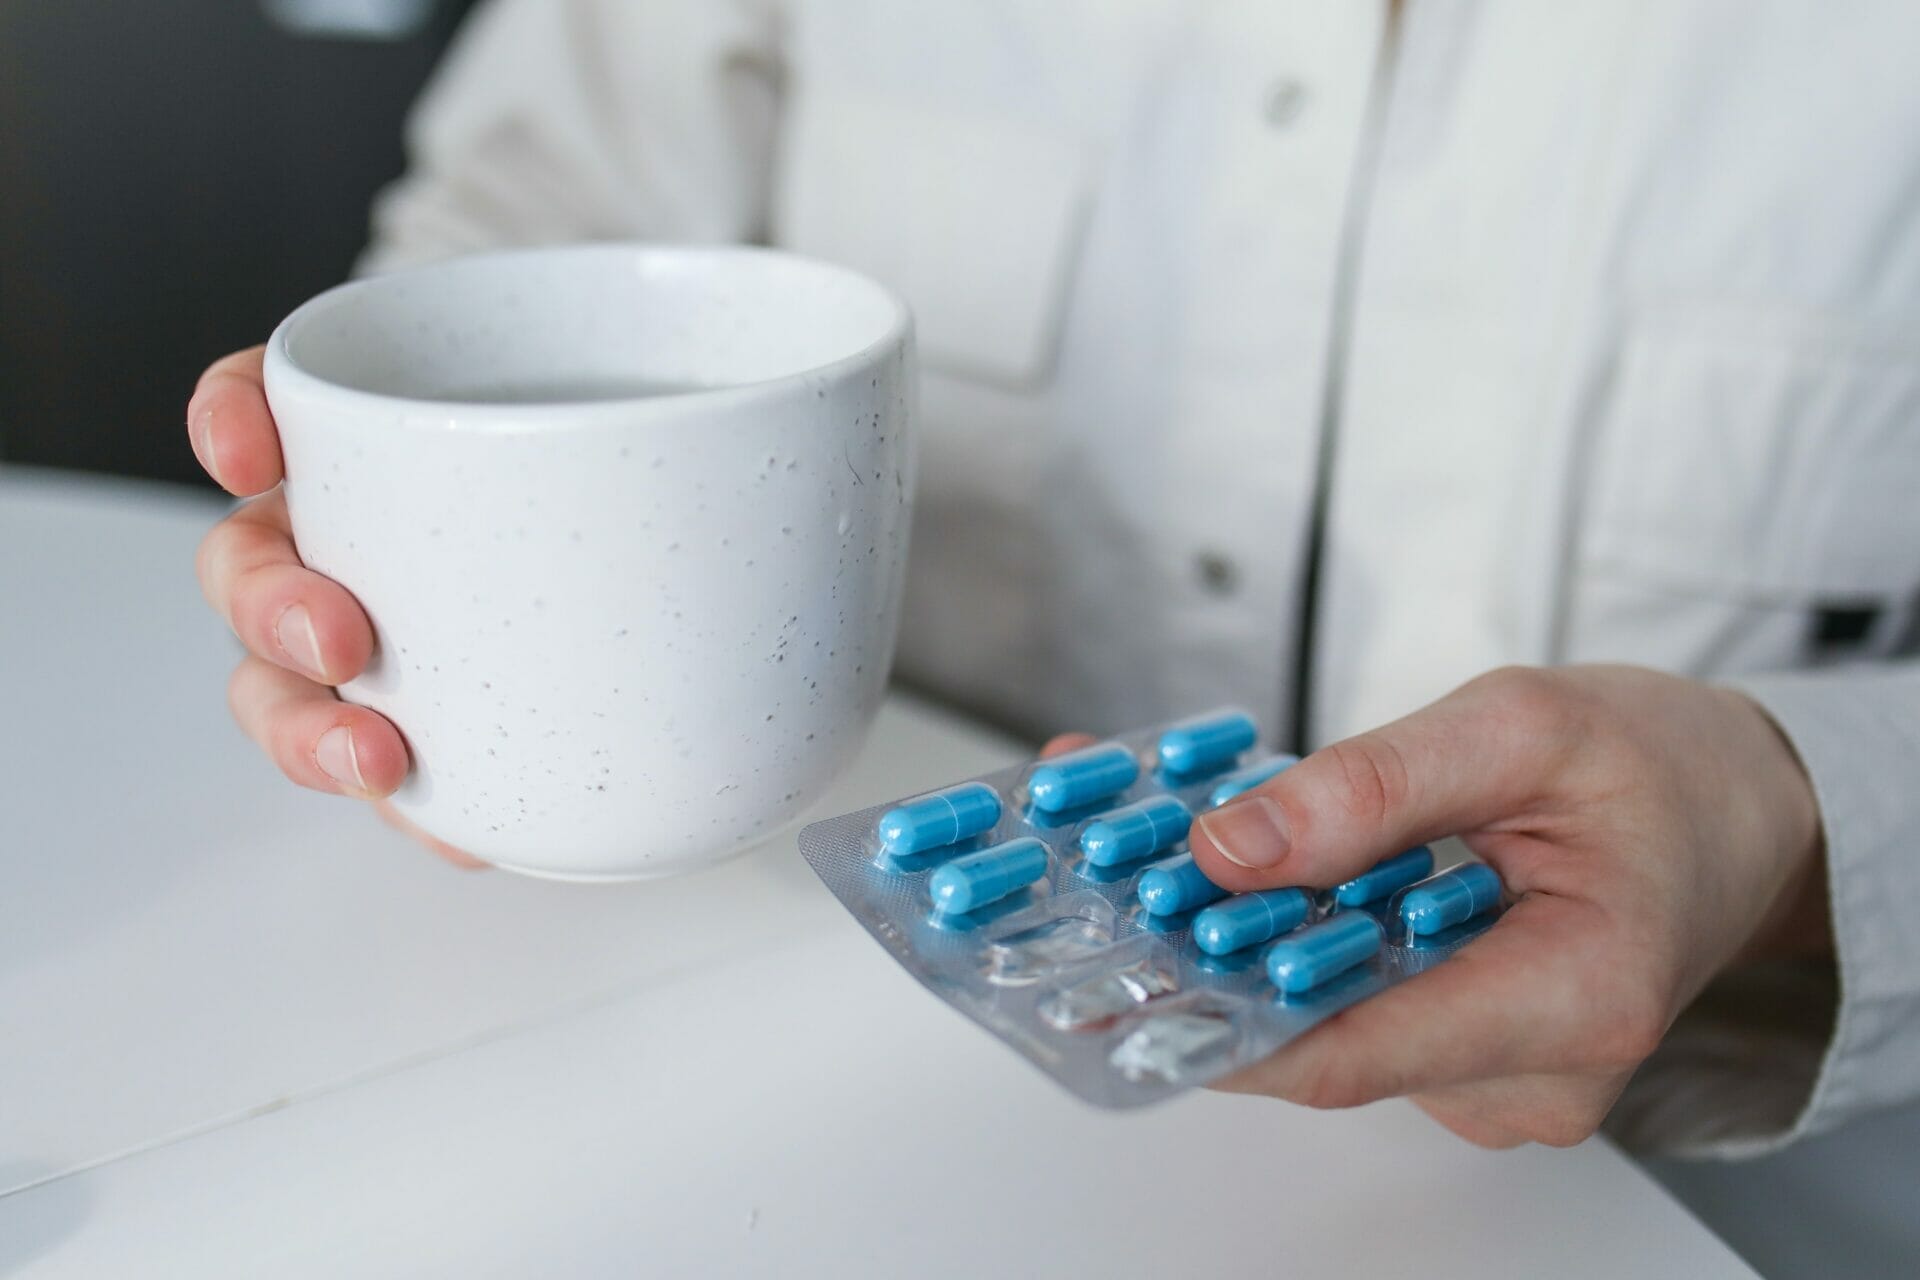 A person holding a cup and a packet of medication